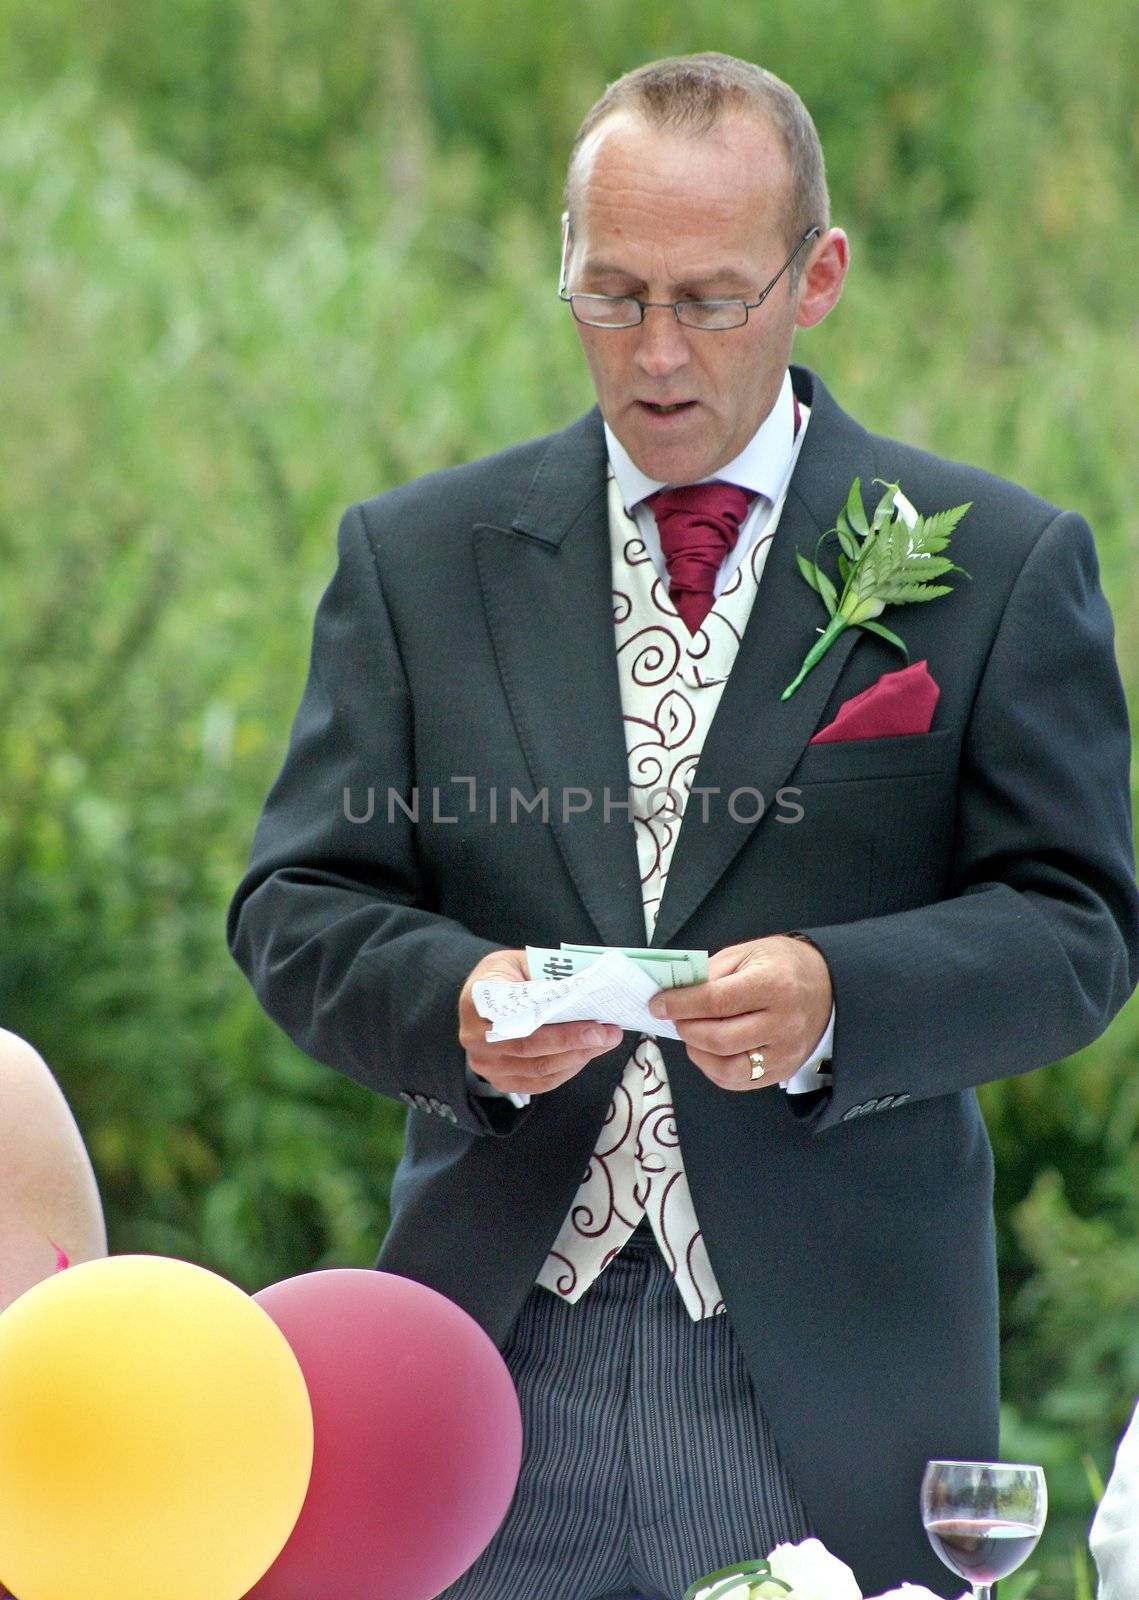 The Groom giving his speech after his Wedding